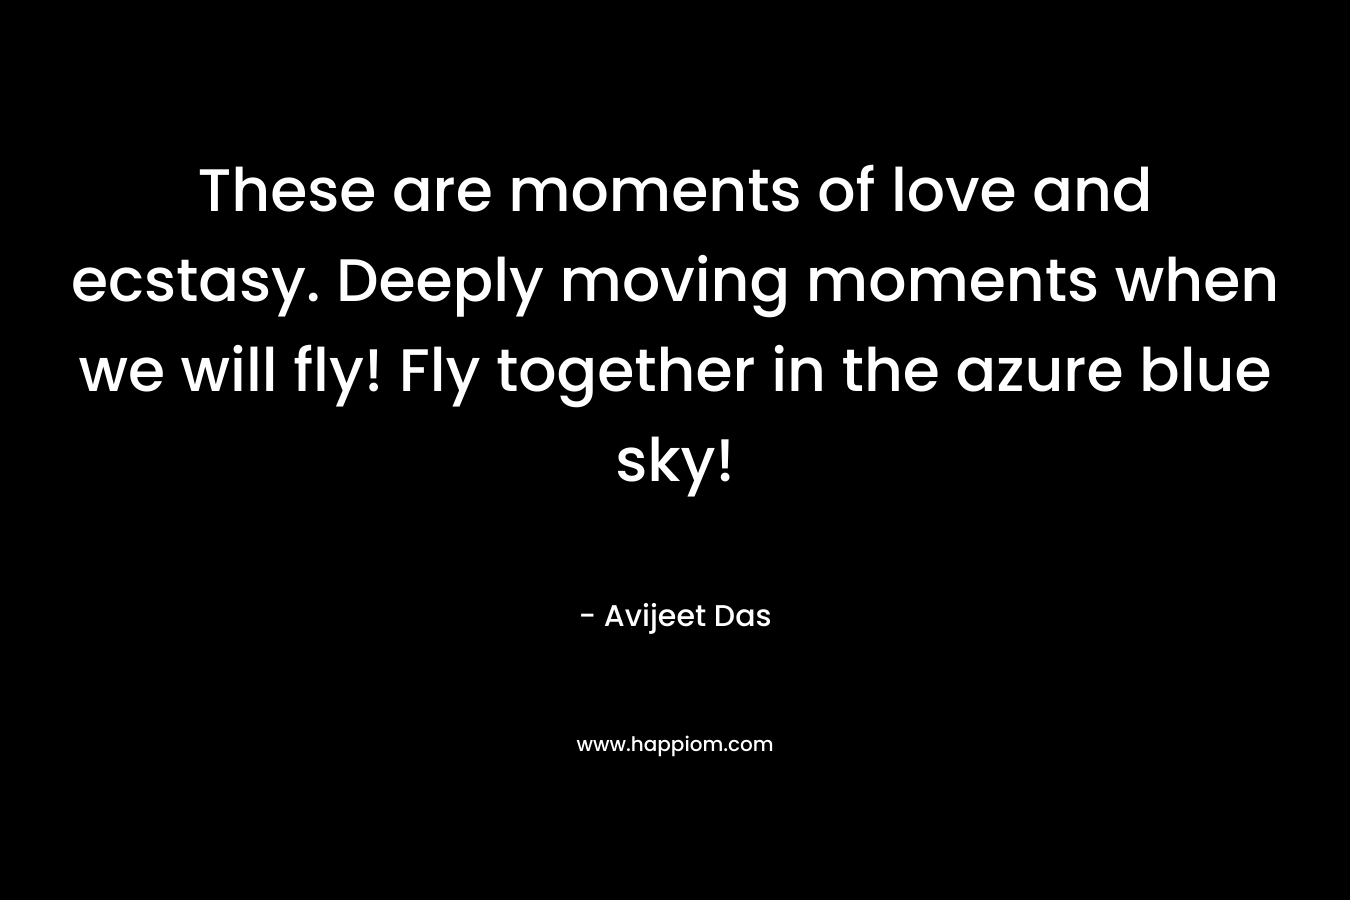 These are moments of love and ecstasy. Deeply moving moments when we will fly! Fly together in the azure blue sky!